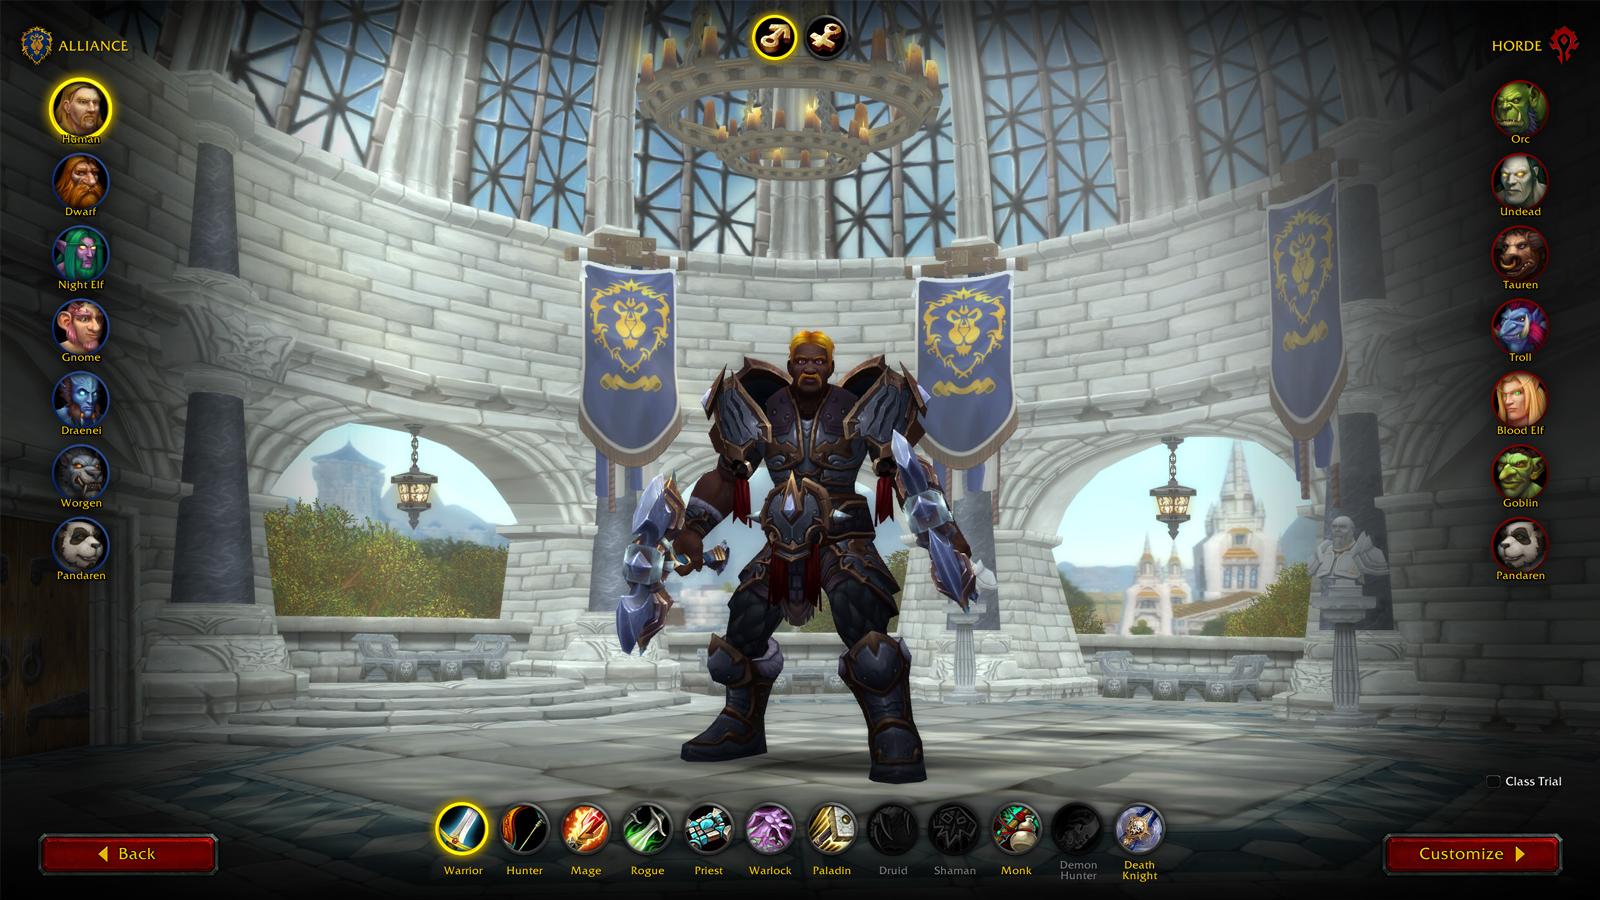 A screenshot of the character customization window for World of Warcraft